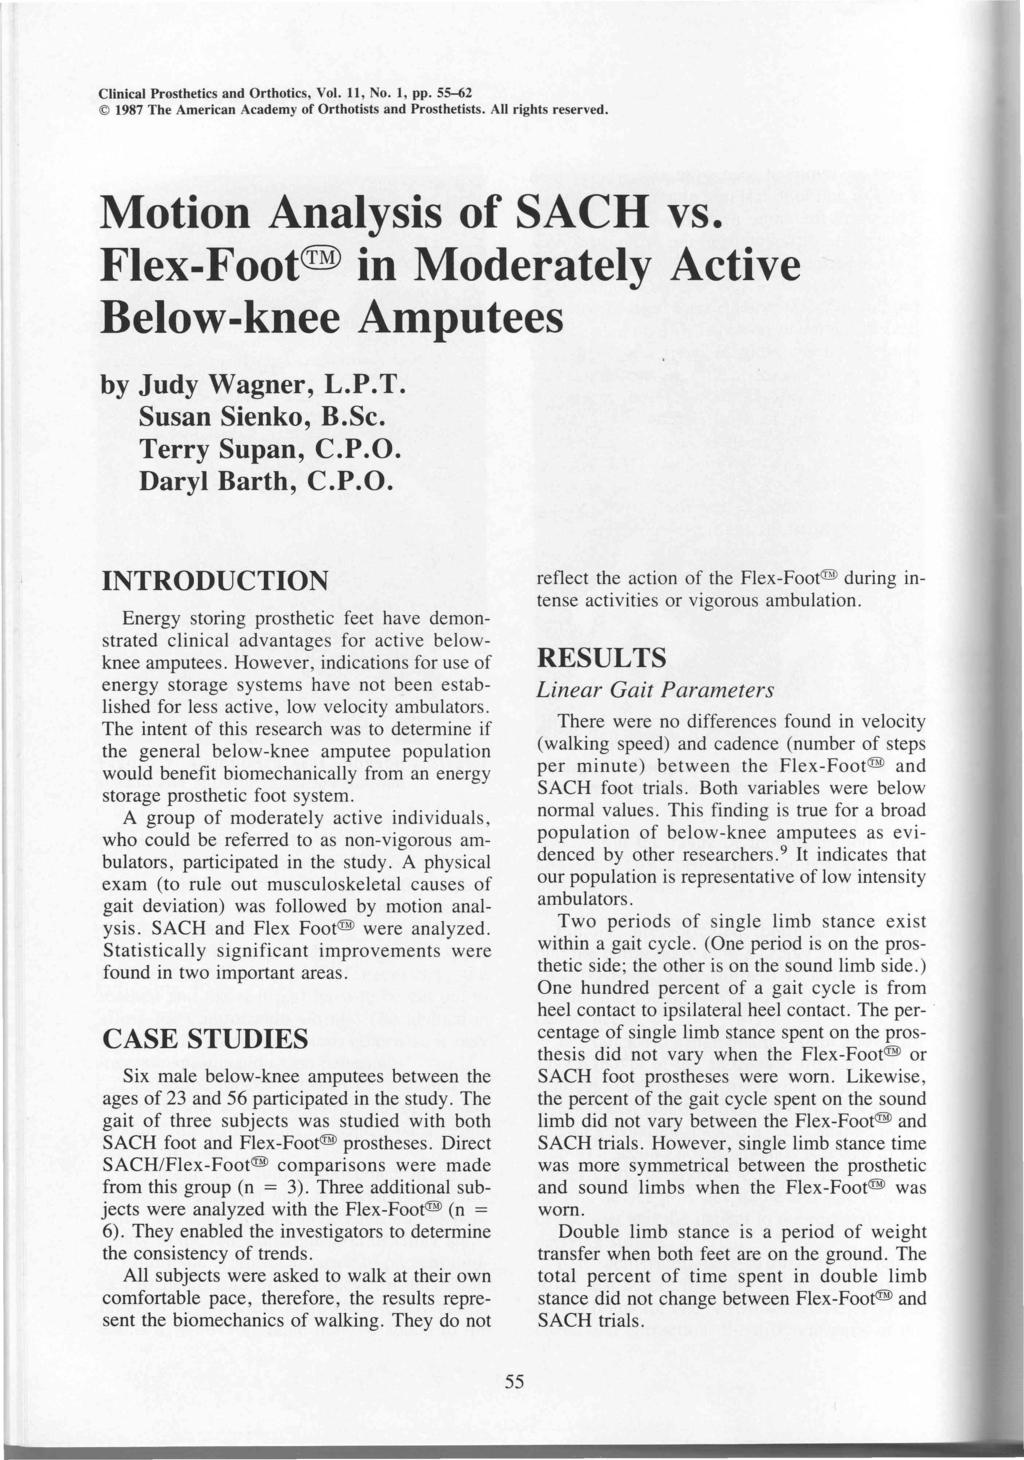 Motion Analysis of S ACH vs. Flex-Foot(tm) in Moderately Active Below-knee Amputees by Judy Wagner, L.P.T. Susan Sienko, B.Sc. Terry Supan, C.P.O.